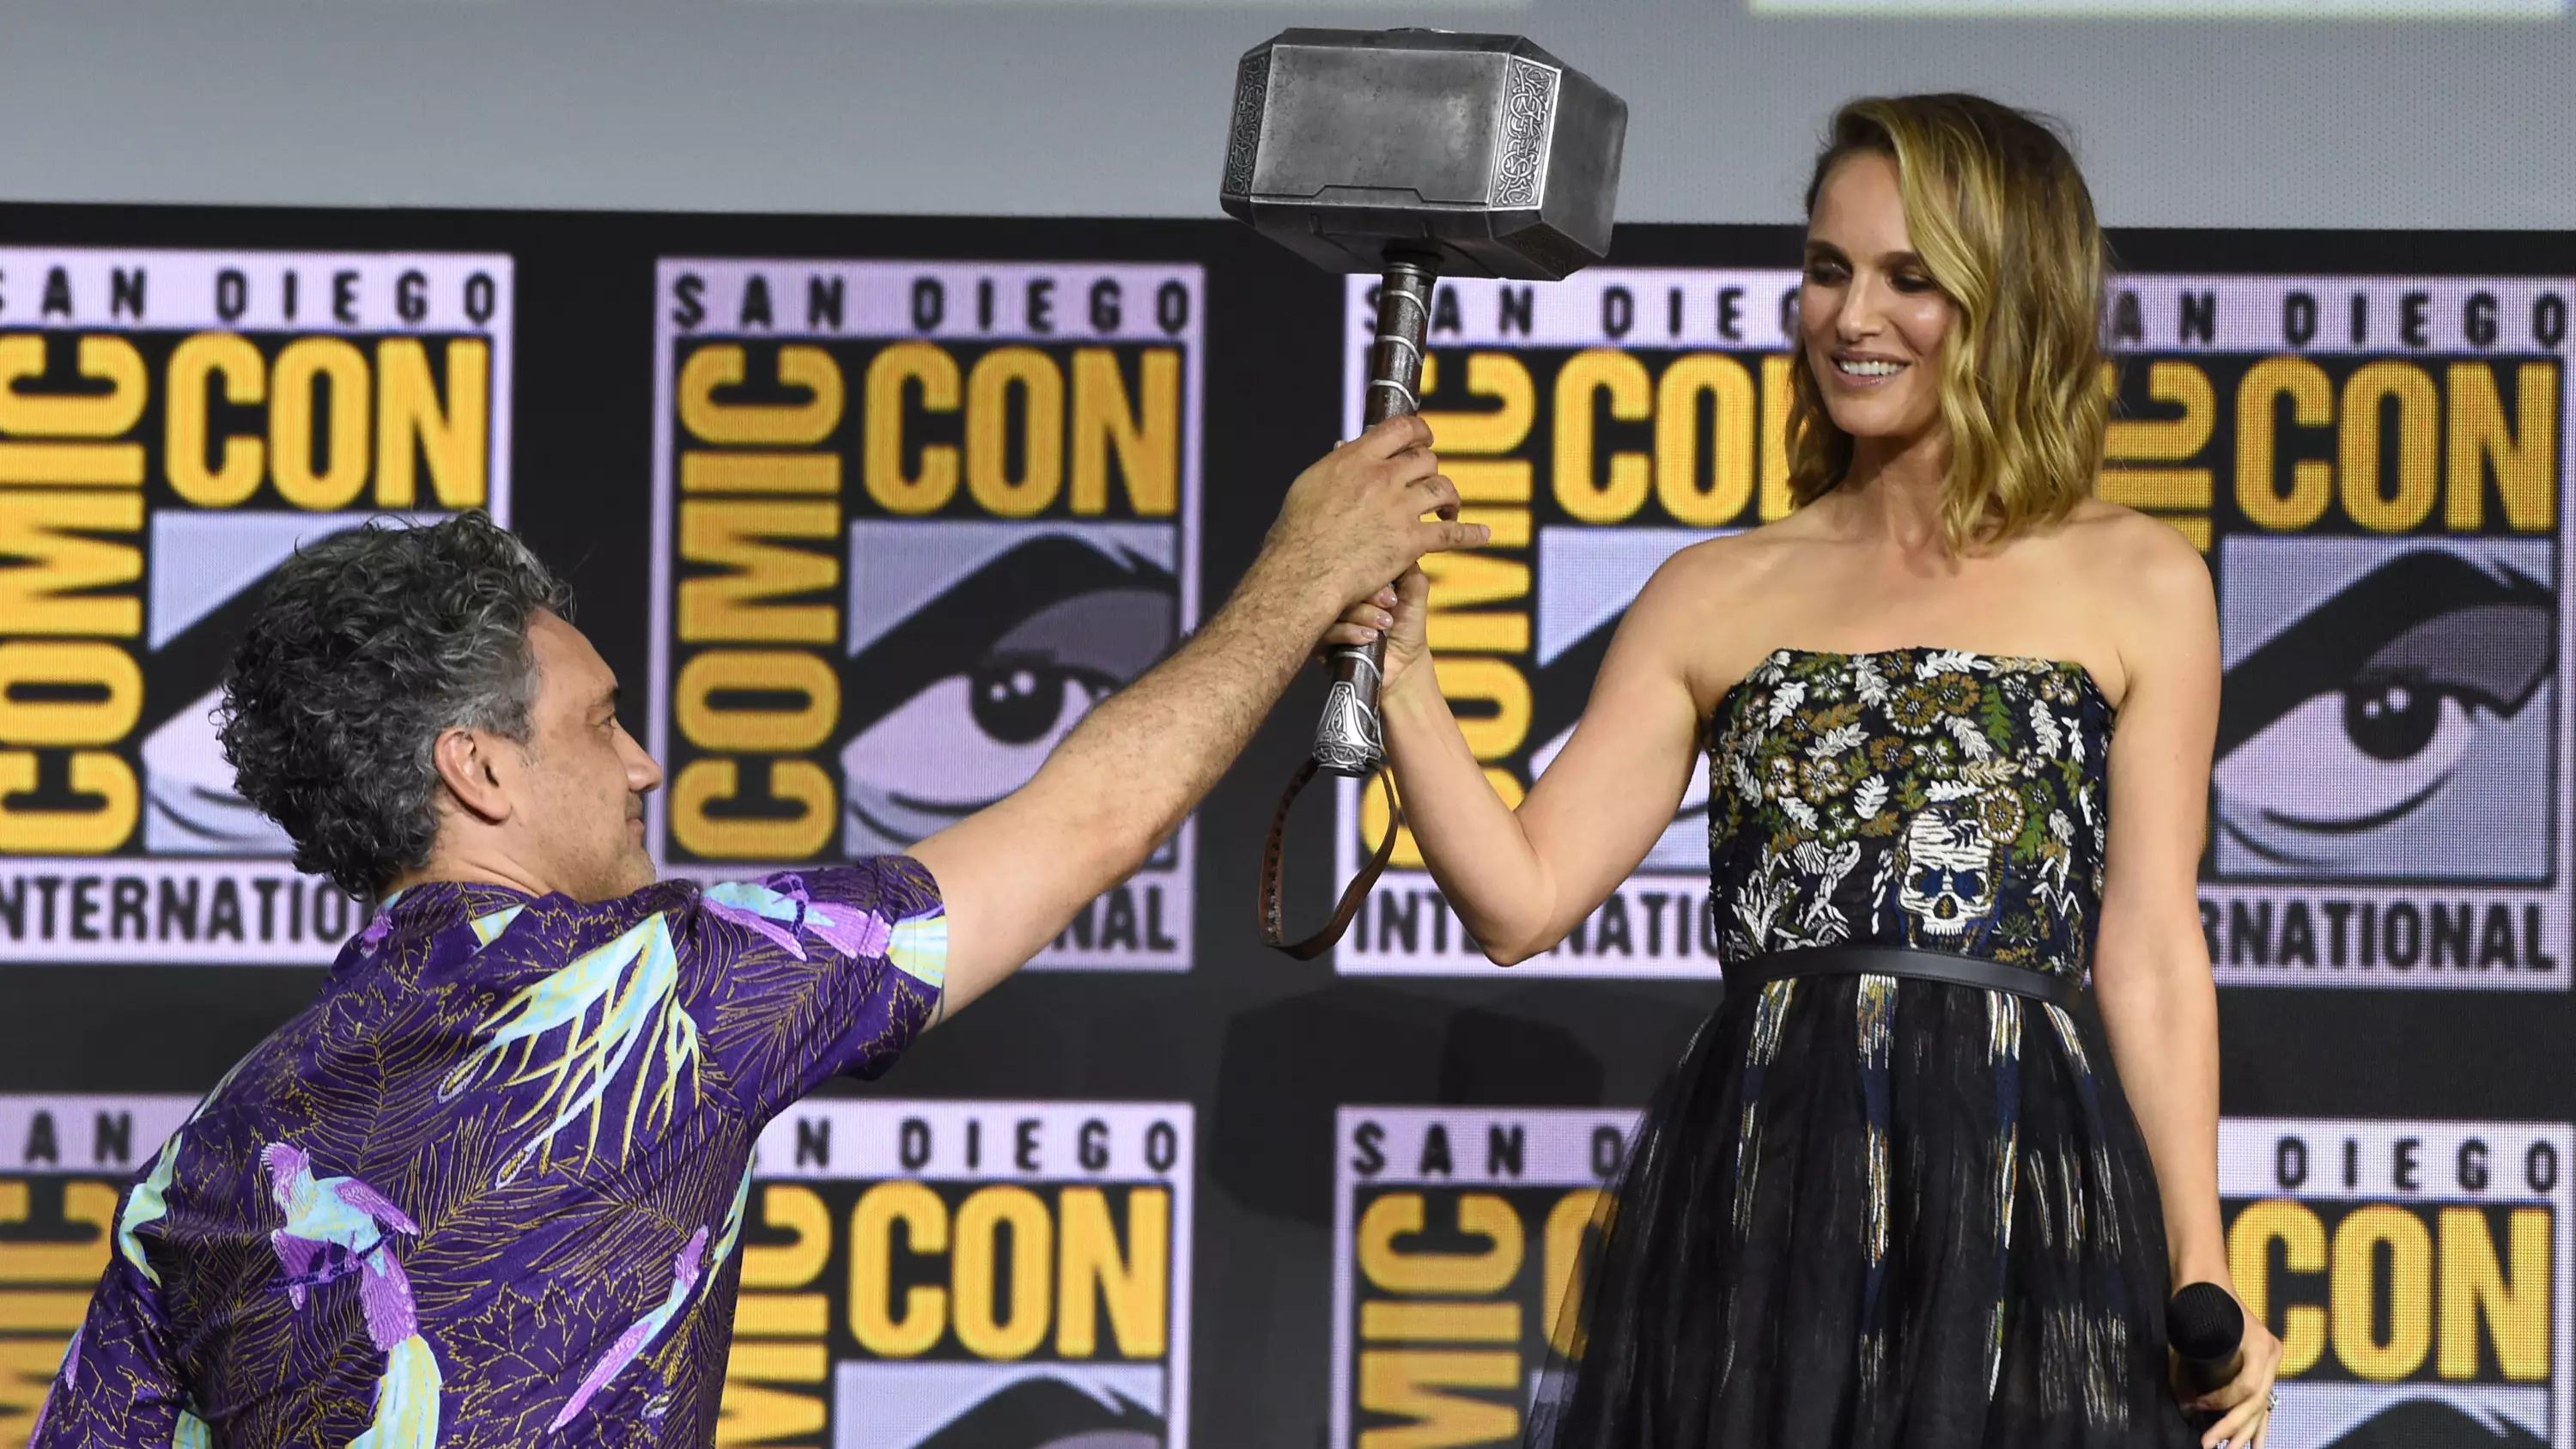 Natalie Portman To Play Lady Thor In Upcoming Fourth Thor Movie